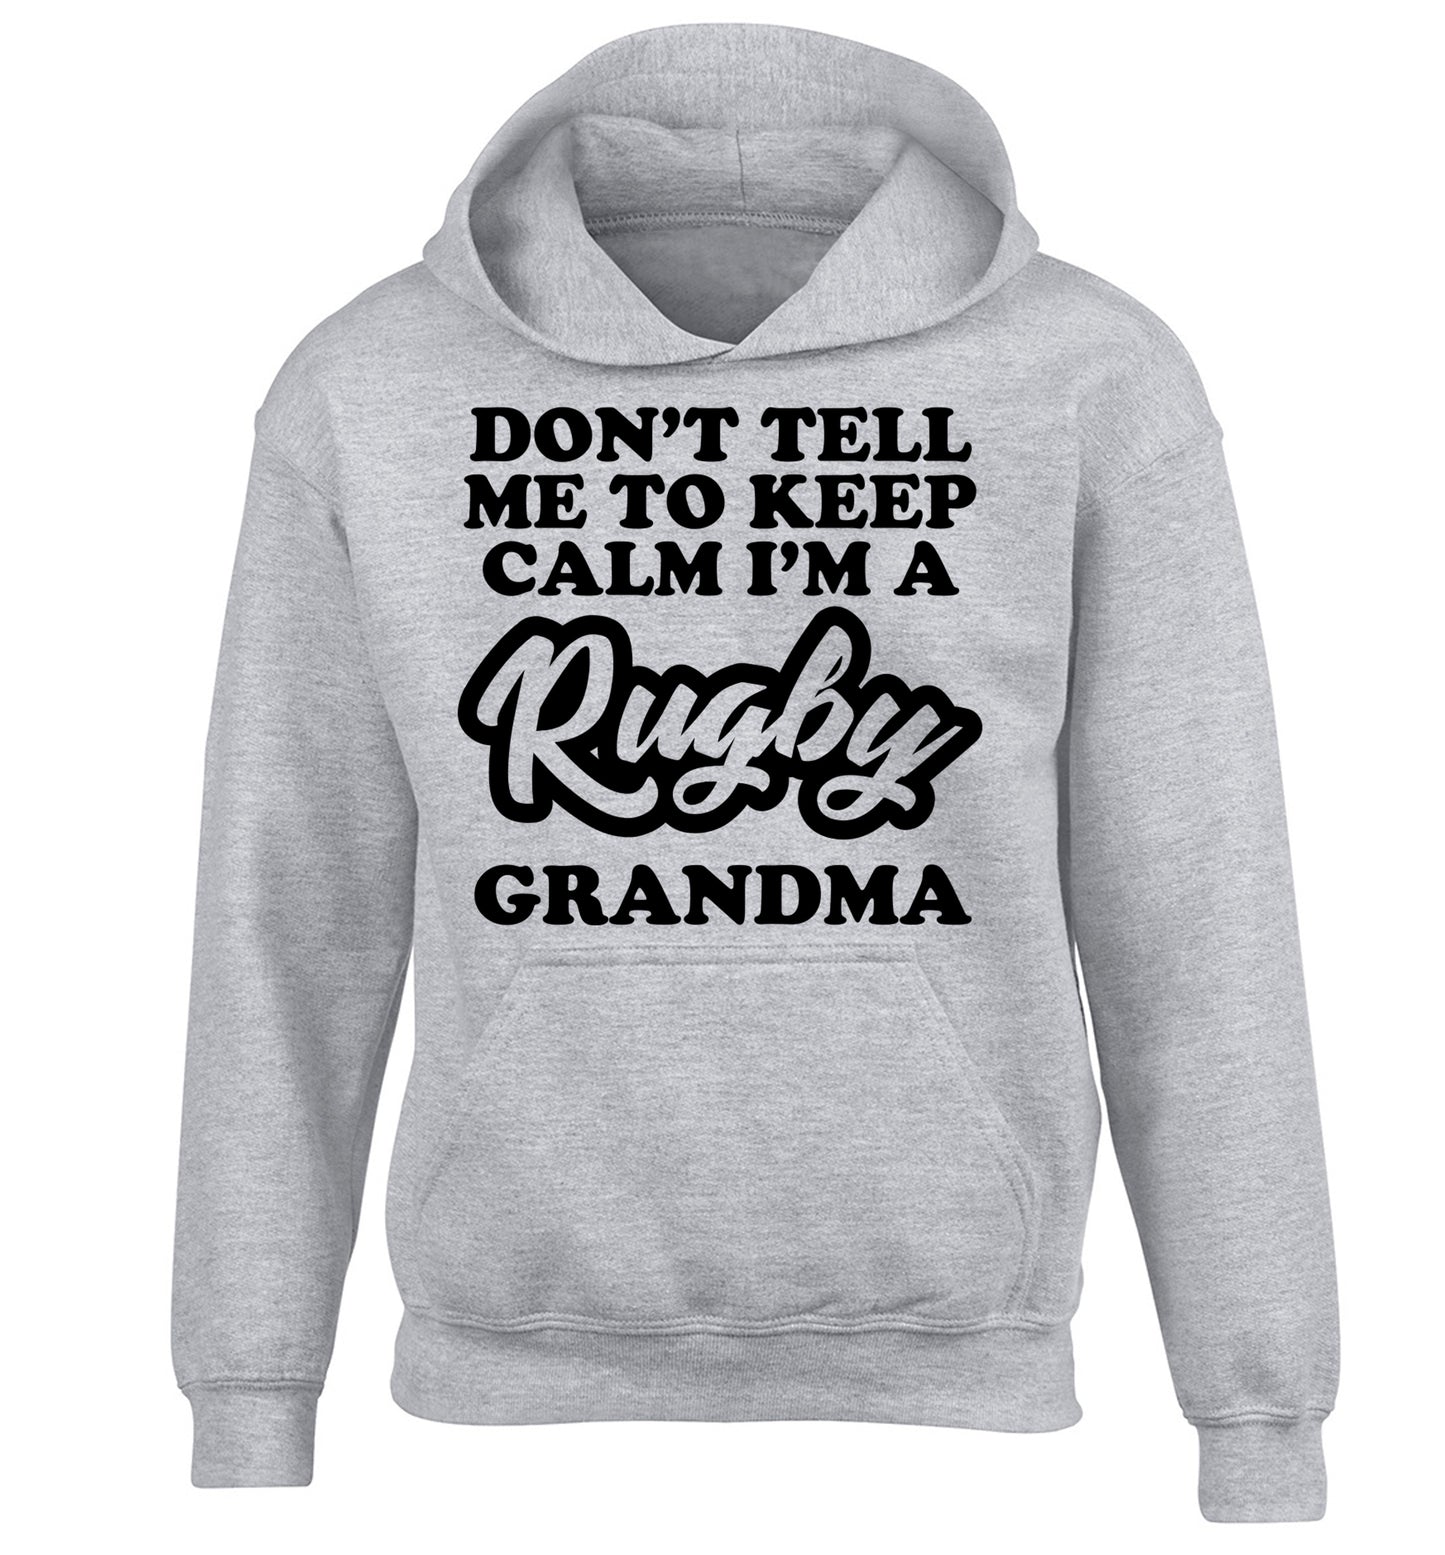 Don't tell me to keep calm I'm a rugby grandma children's grey hoodie 12-13 Years